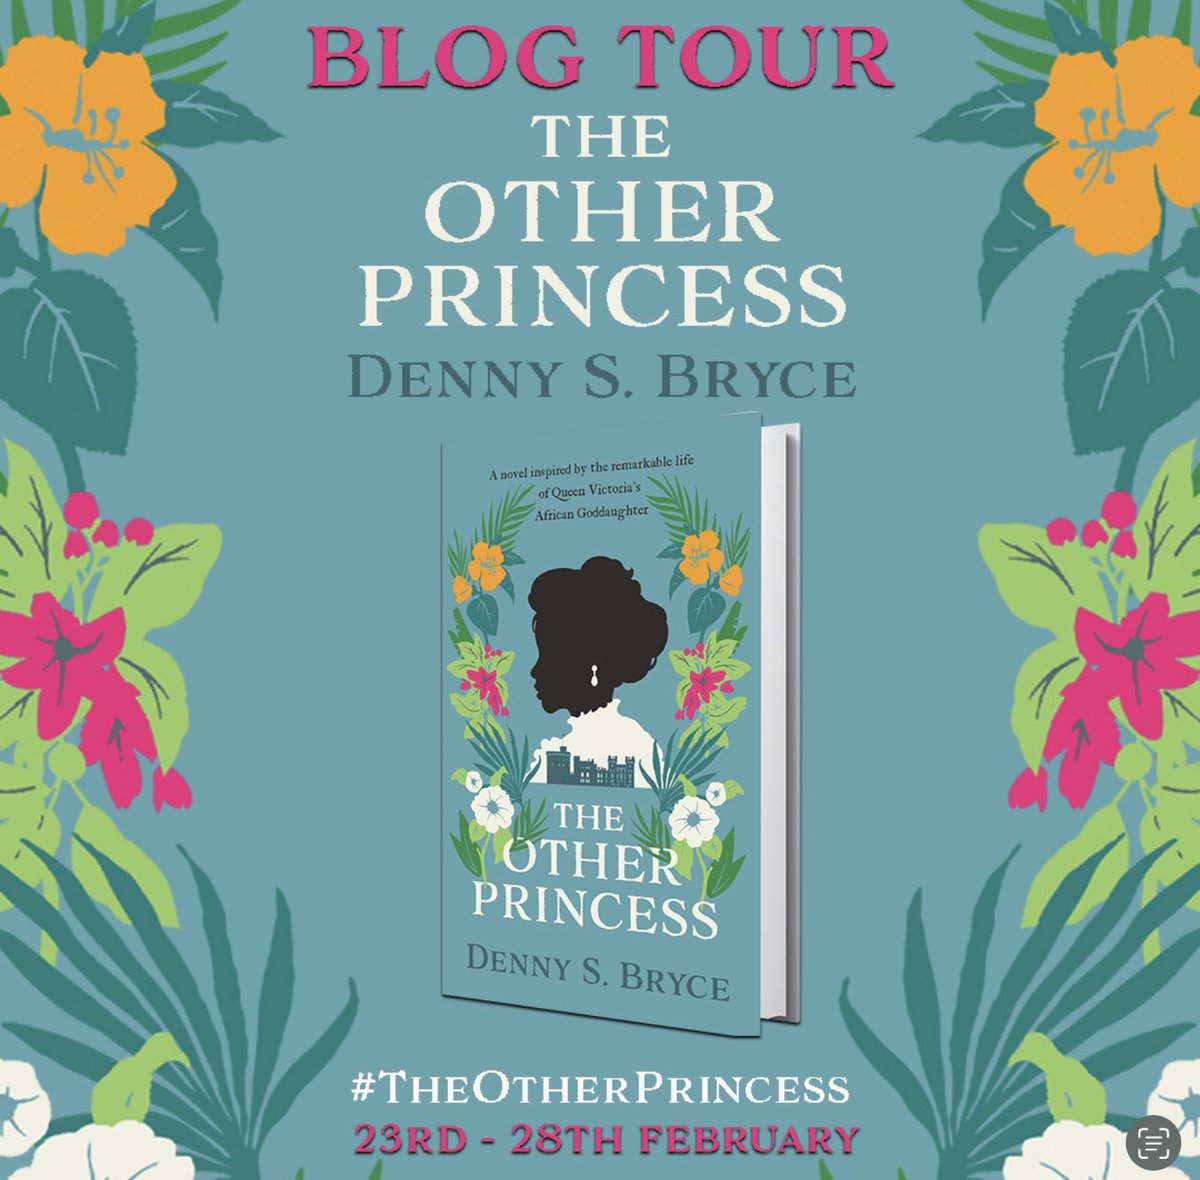 📮📮BOOK POST📮📮

Thanks so much to @AllisonandBusby for my proof copy of #TheOtherPrincess by @DennySBryce ahead of the book tour. 

This sounds fascinating 💕